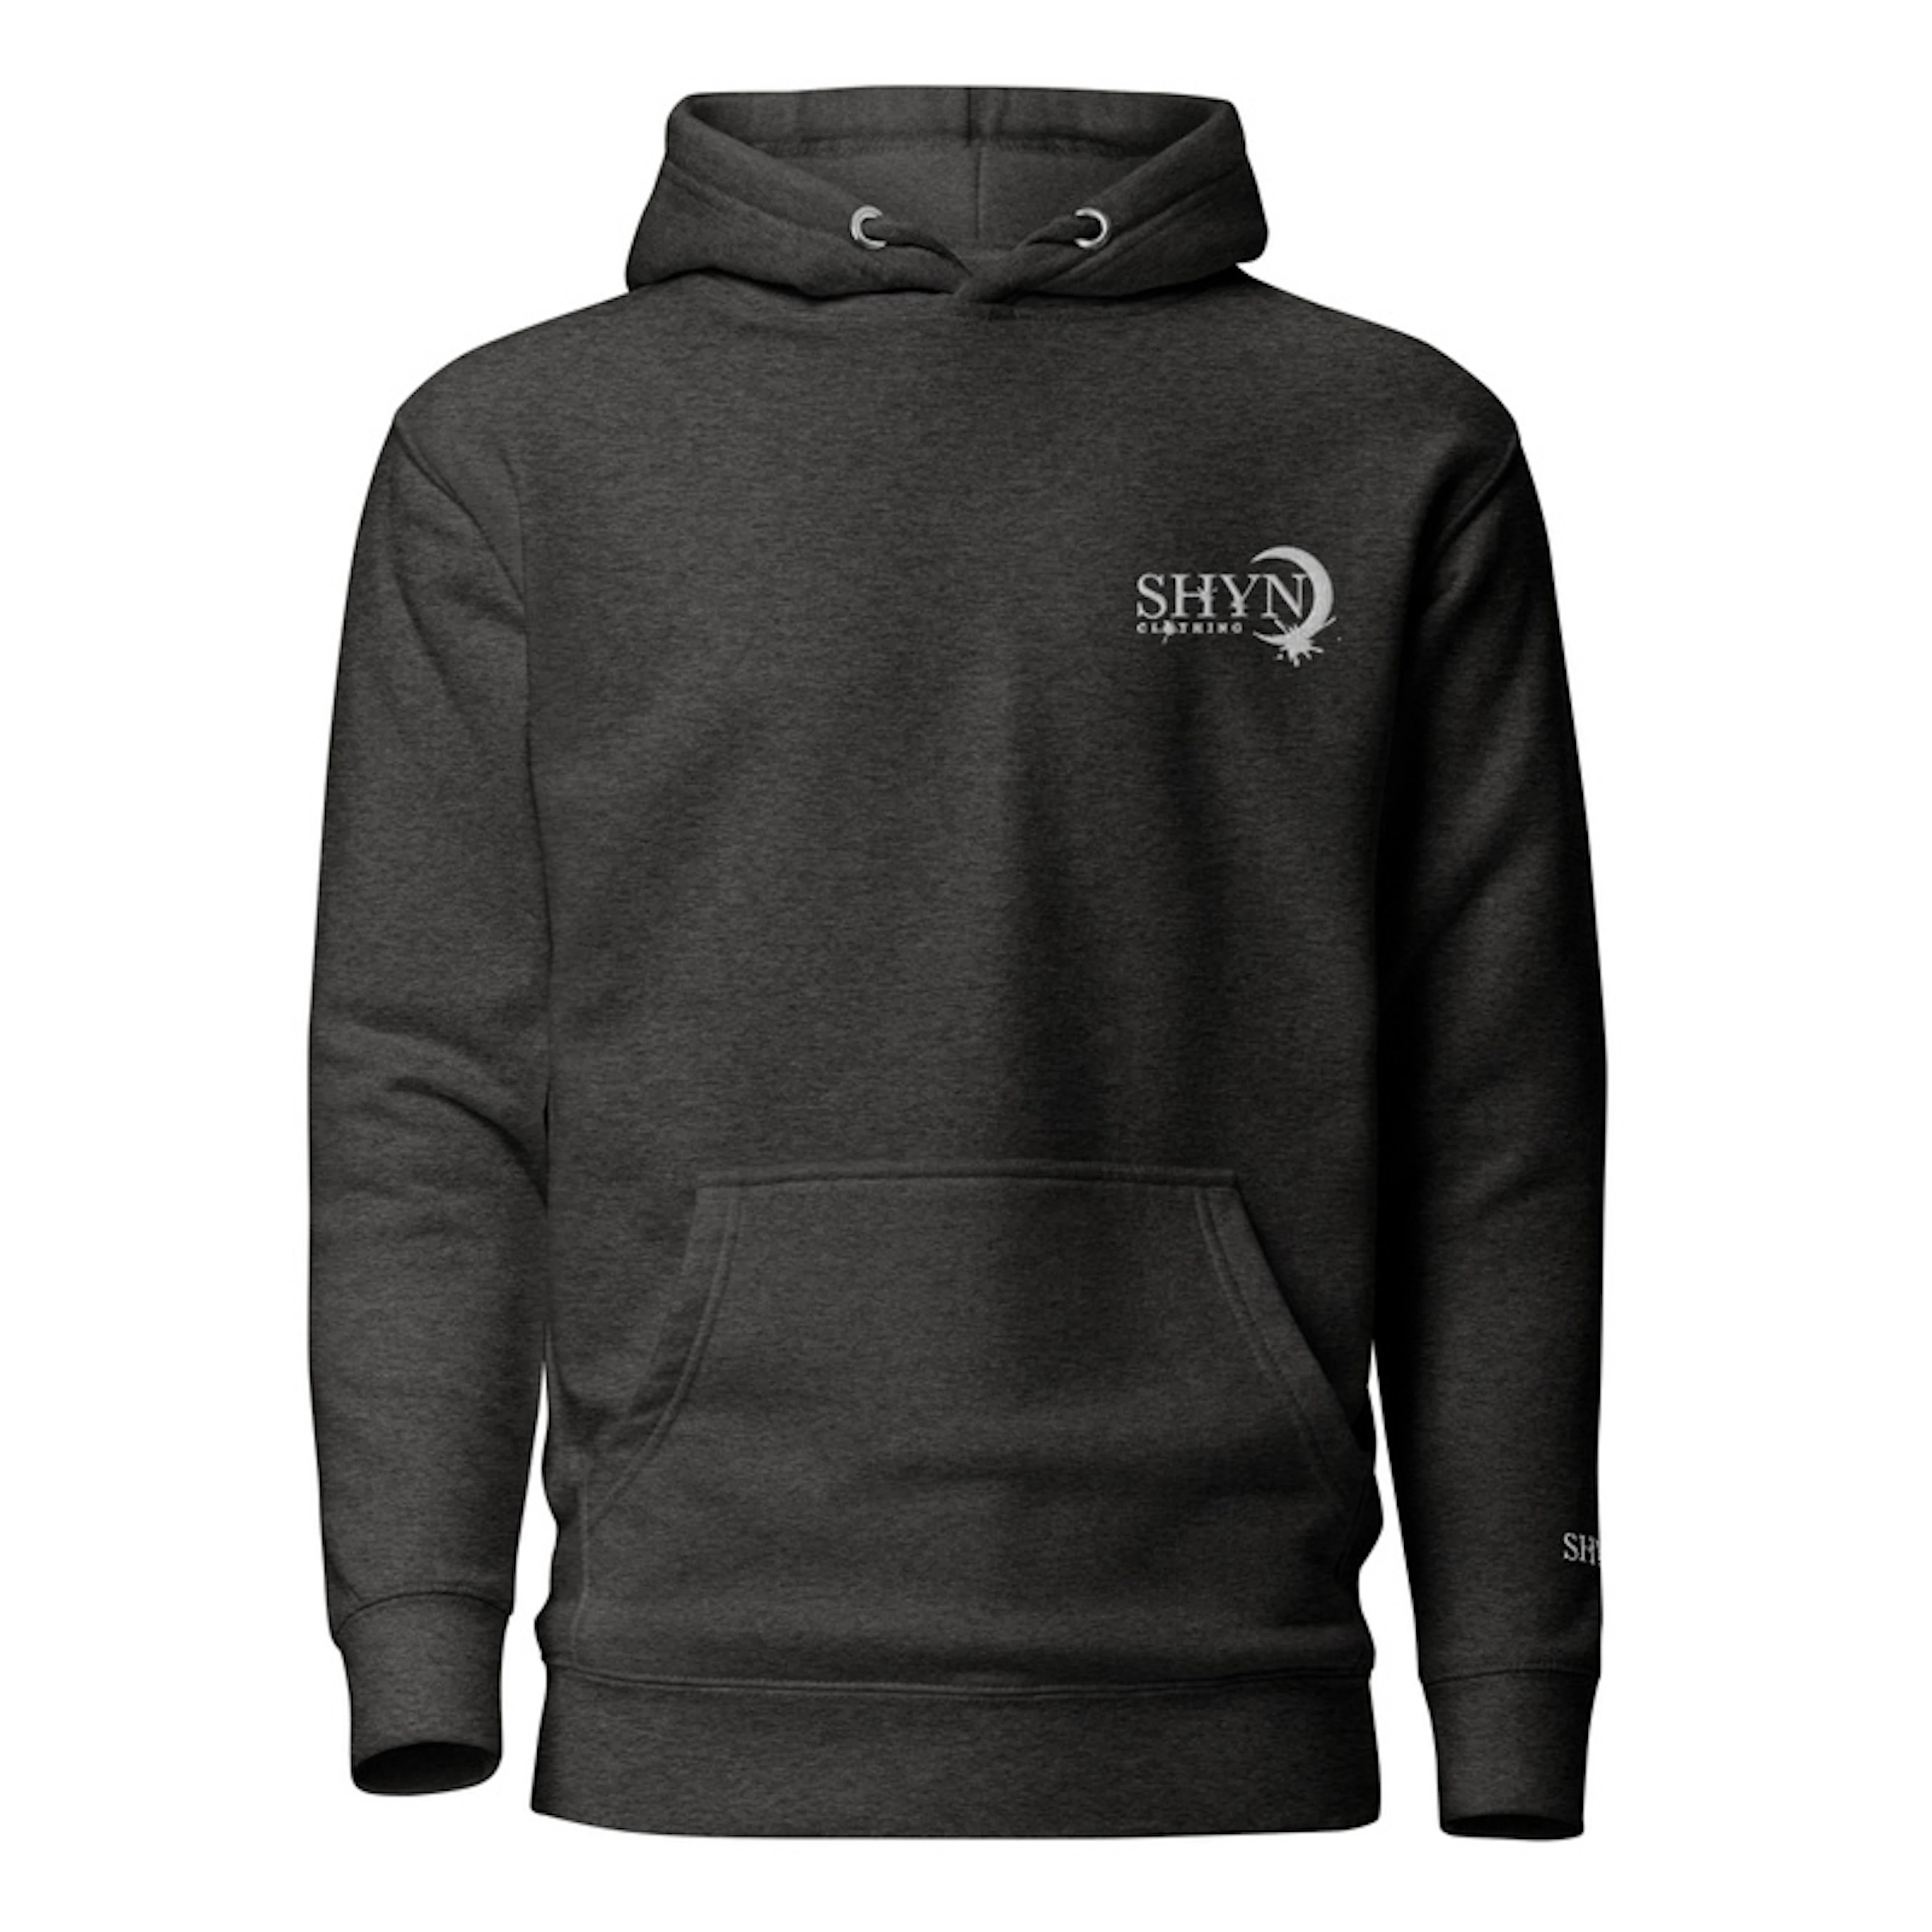 New Shyn Clothing Embroidered Hoodies